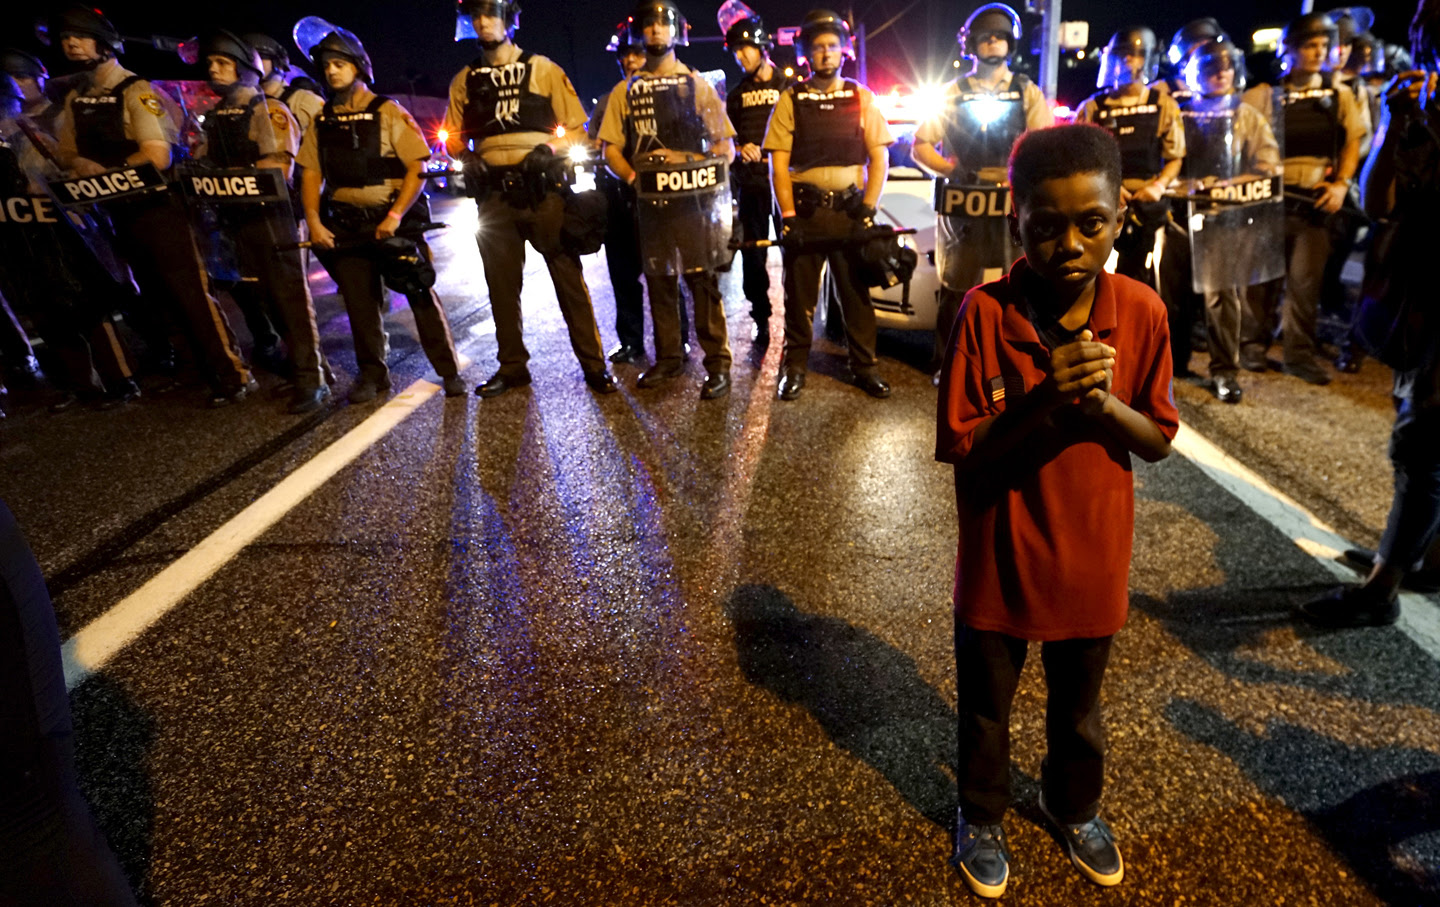 Child stands in front of police